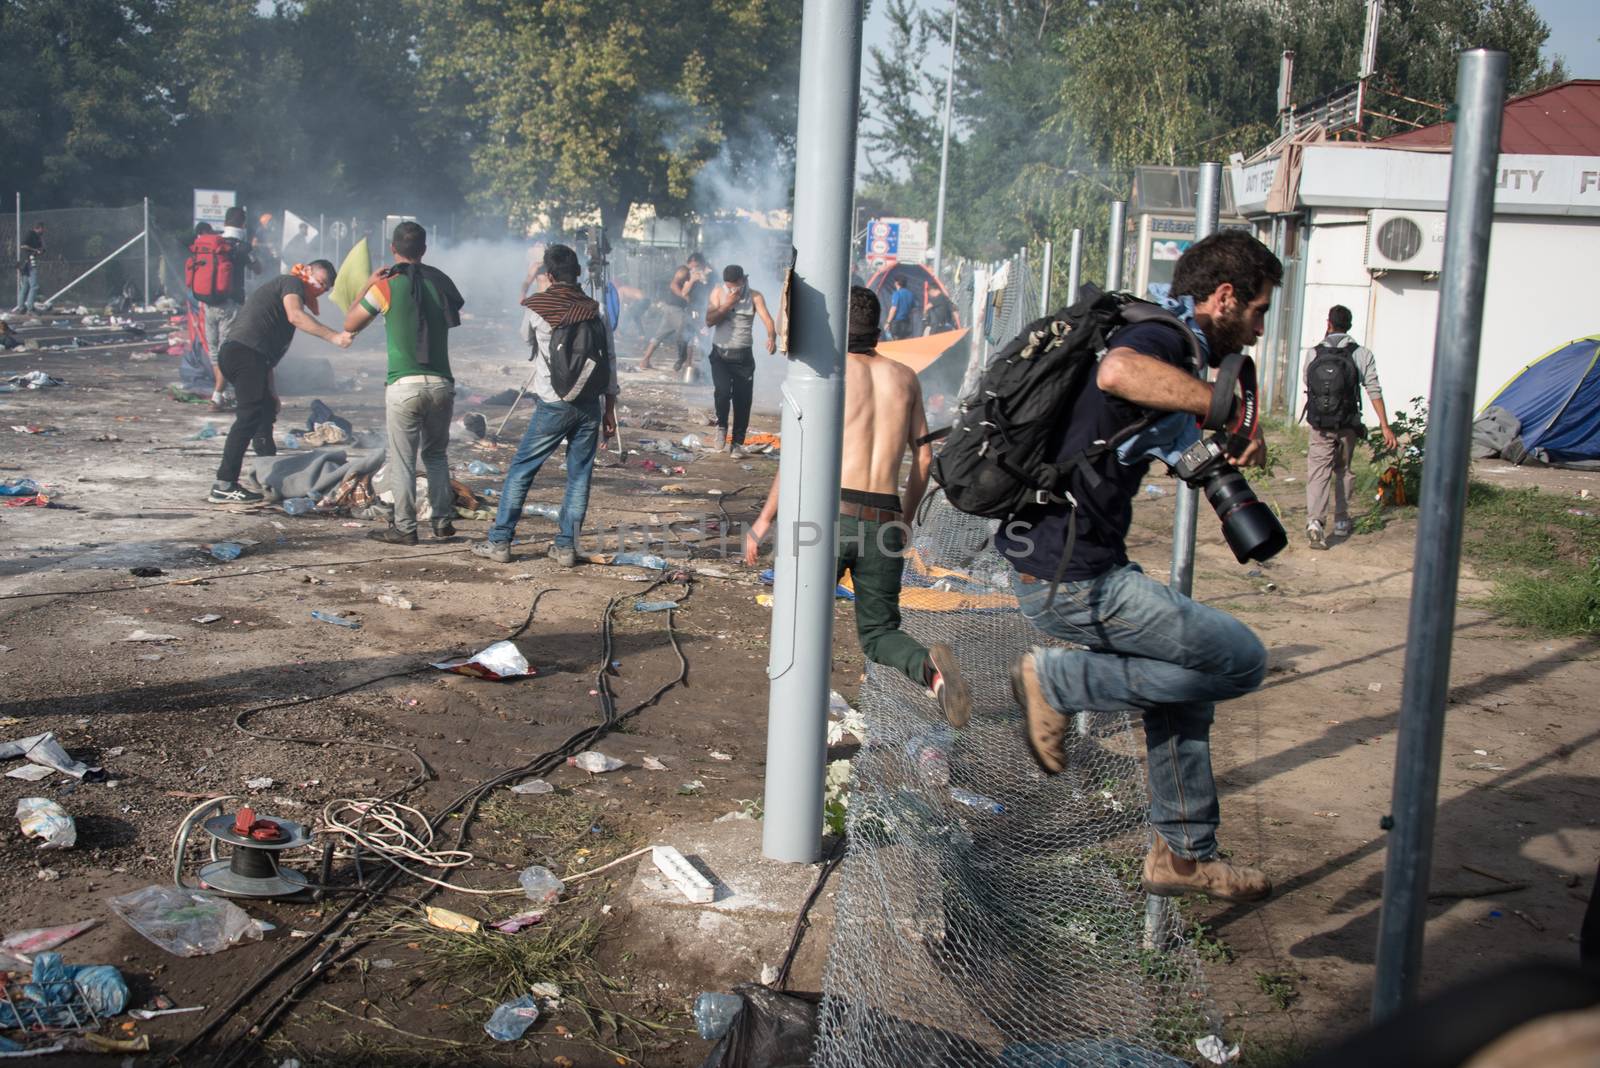 SERBIA, Horgos: A cameraman flees as Hungarian riot police clash with refugees waiting to cross the border from the Serbian border town of Horgos on September 16, 2015. 